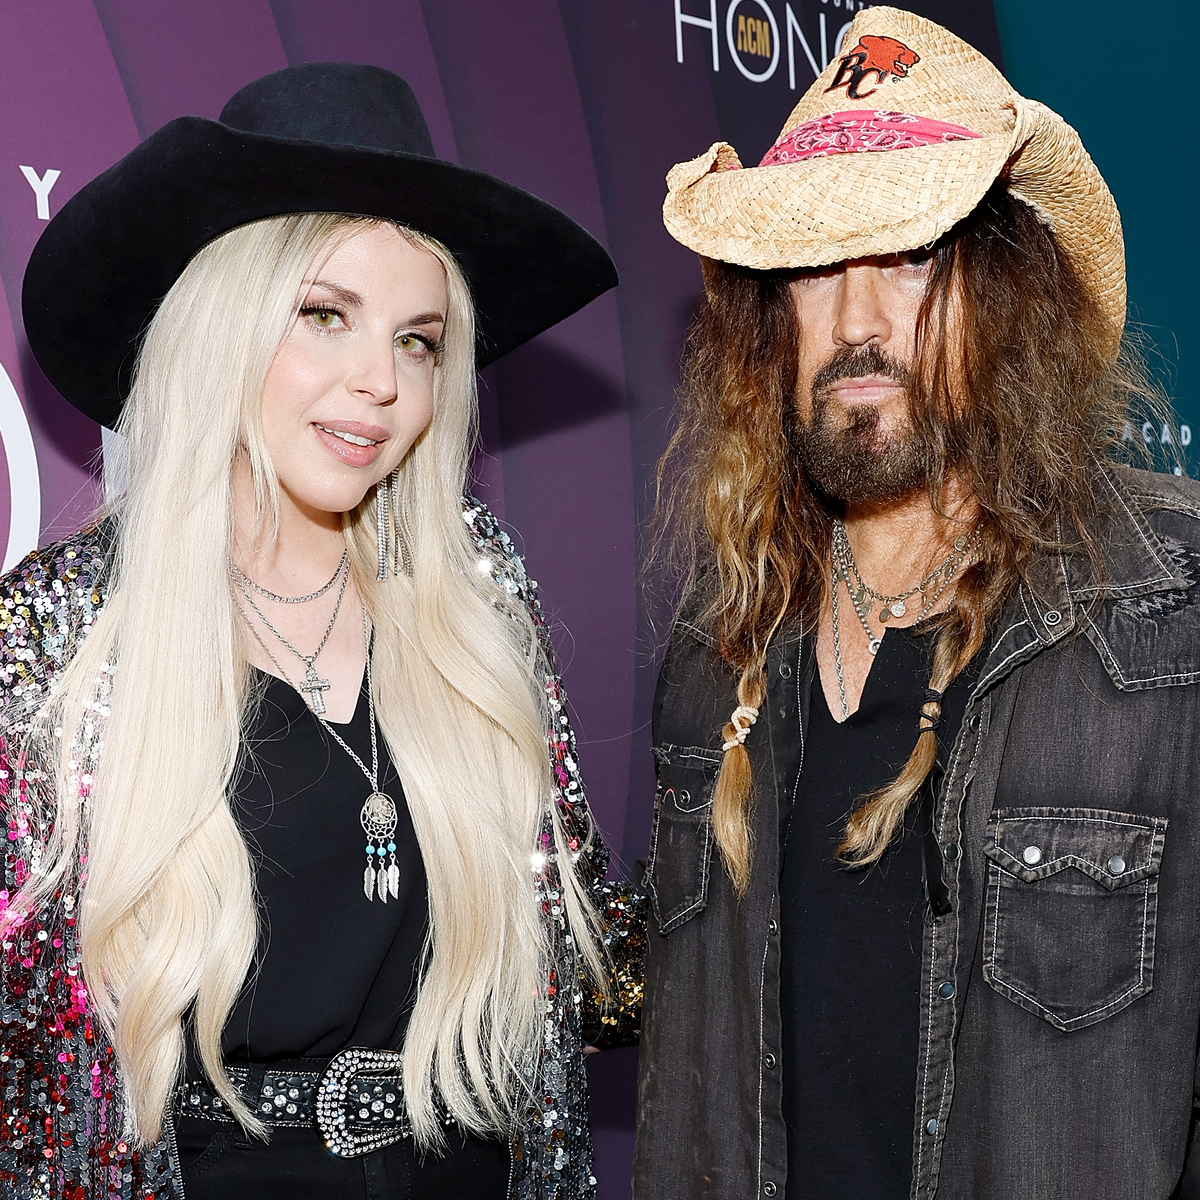 Billy Ray Cyrus’ Ex Firerose Speaks Out After Audio Release